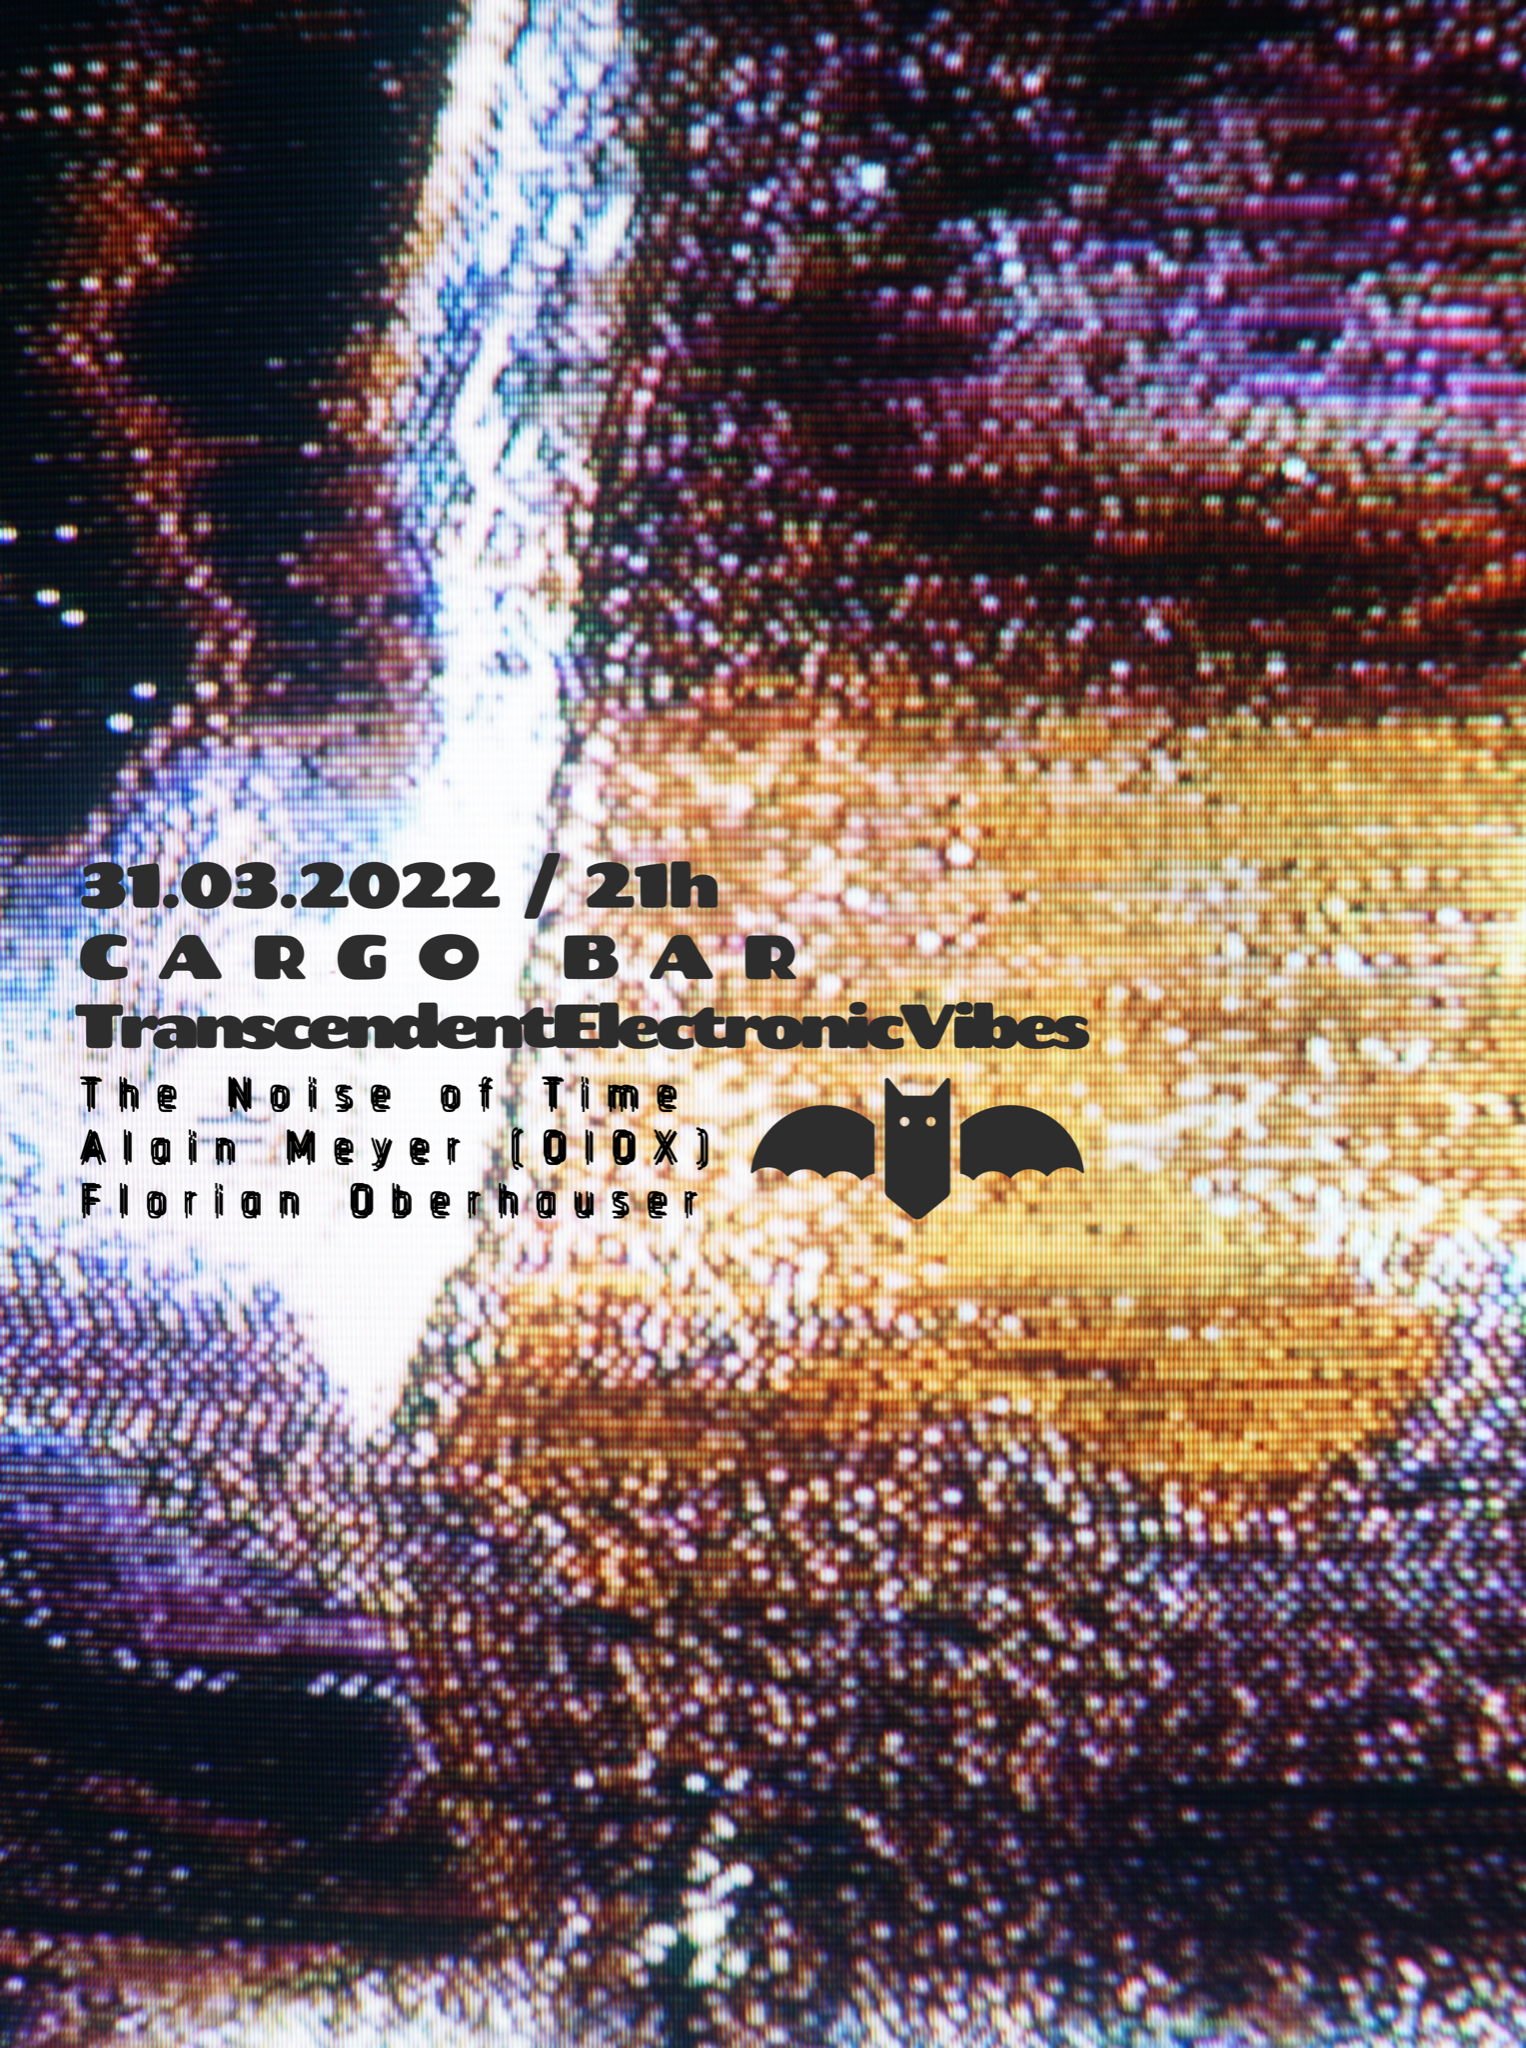 /dms1526  /cargobar-event-pictures/untitled8/untitled0/the-noise-of-time/the%20noise%20of%20time.png